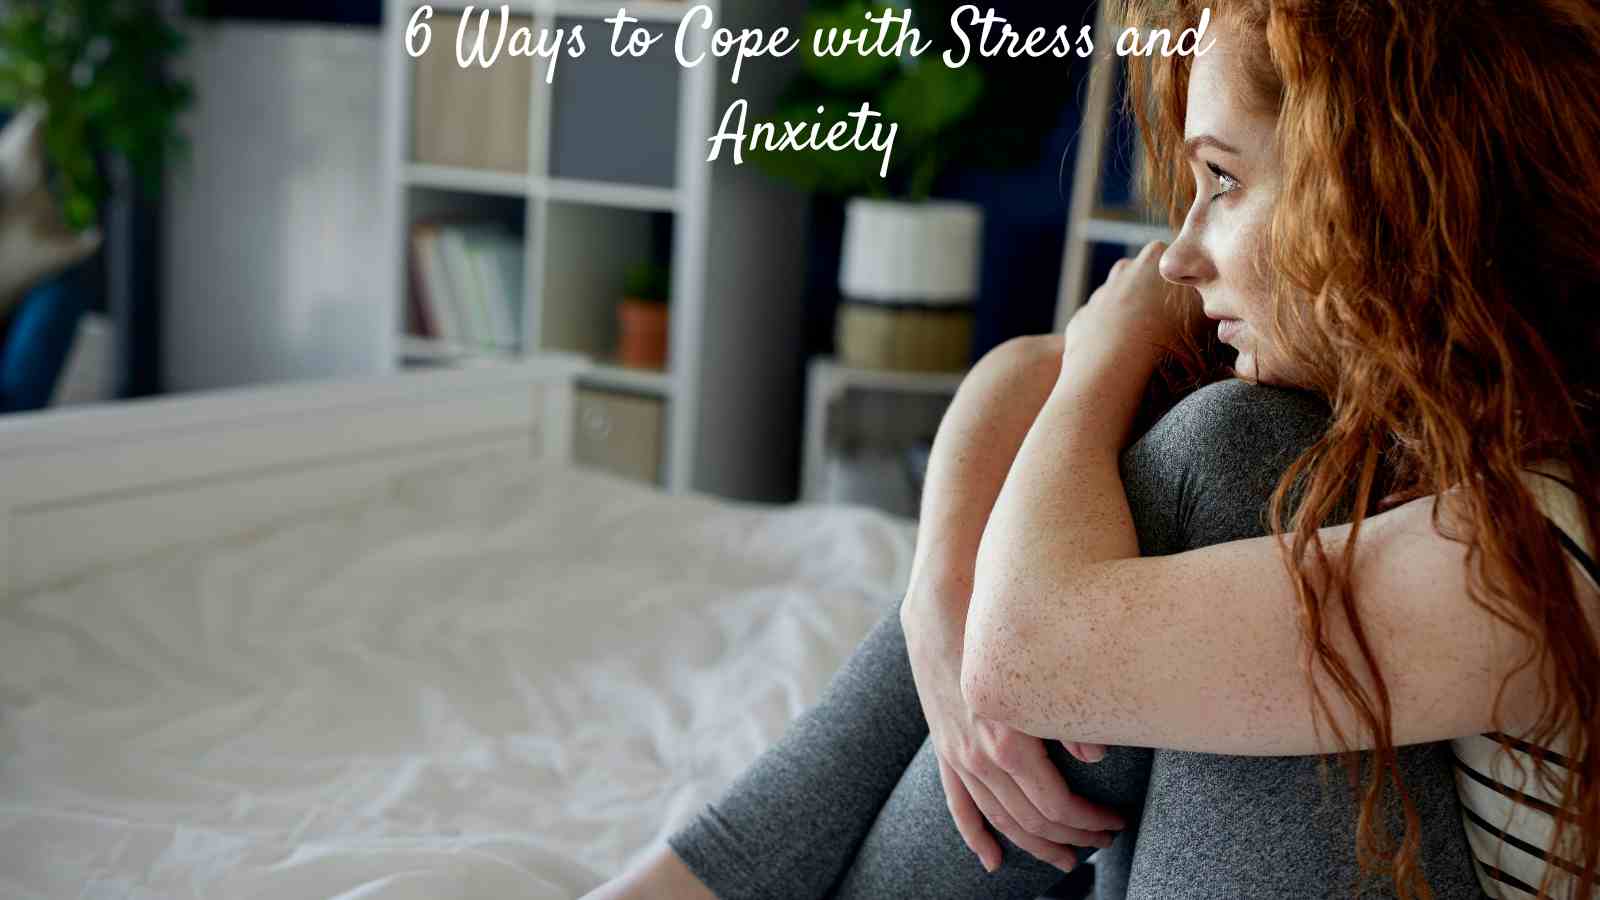 6 Ways to Cope with Stress and Anxiety